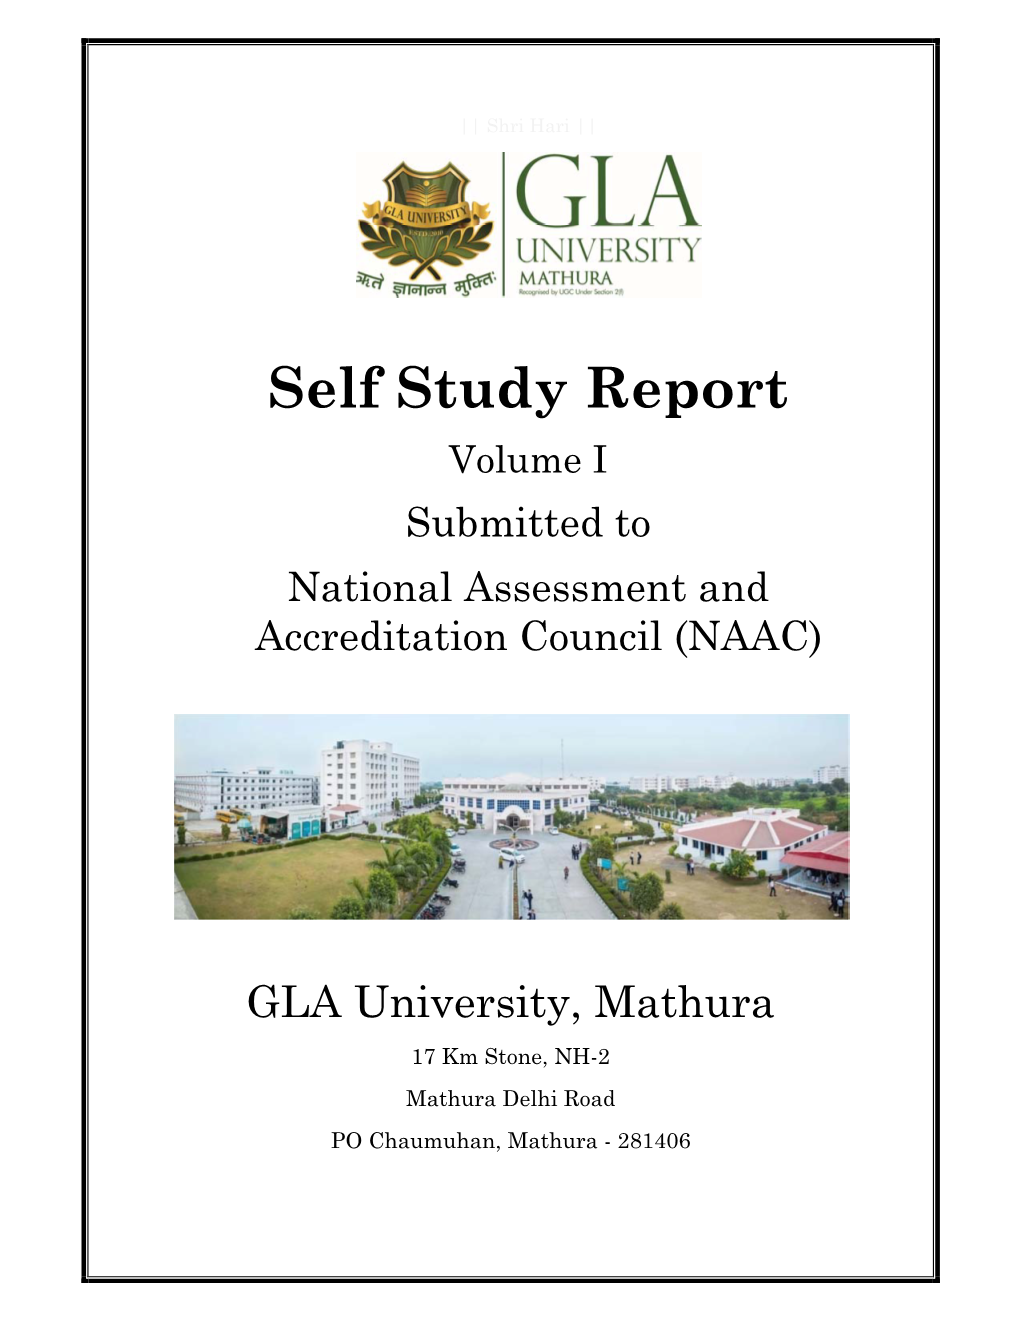 Self Study Report Volume I Submitted to National Assessment and Accreditation Council (NAAC)